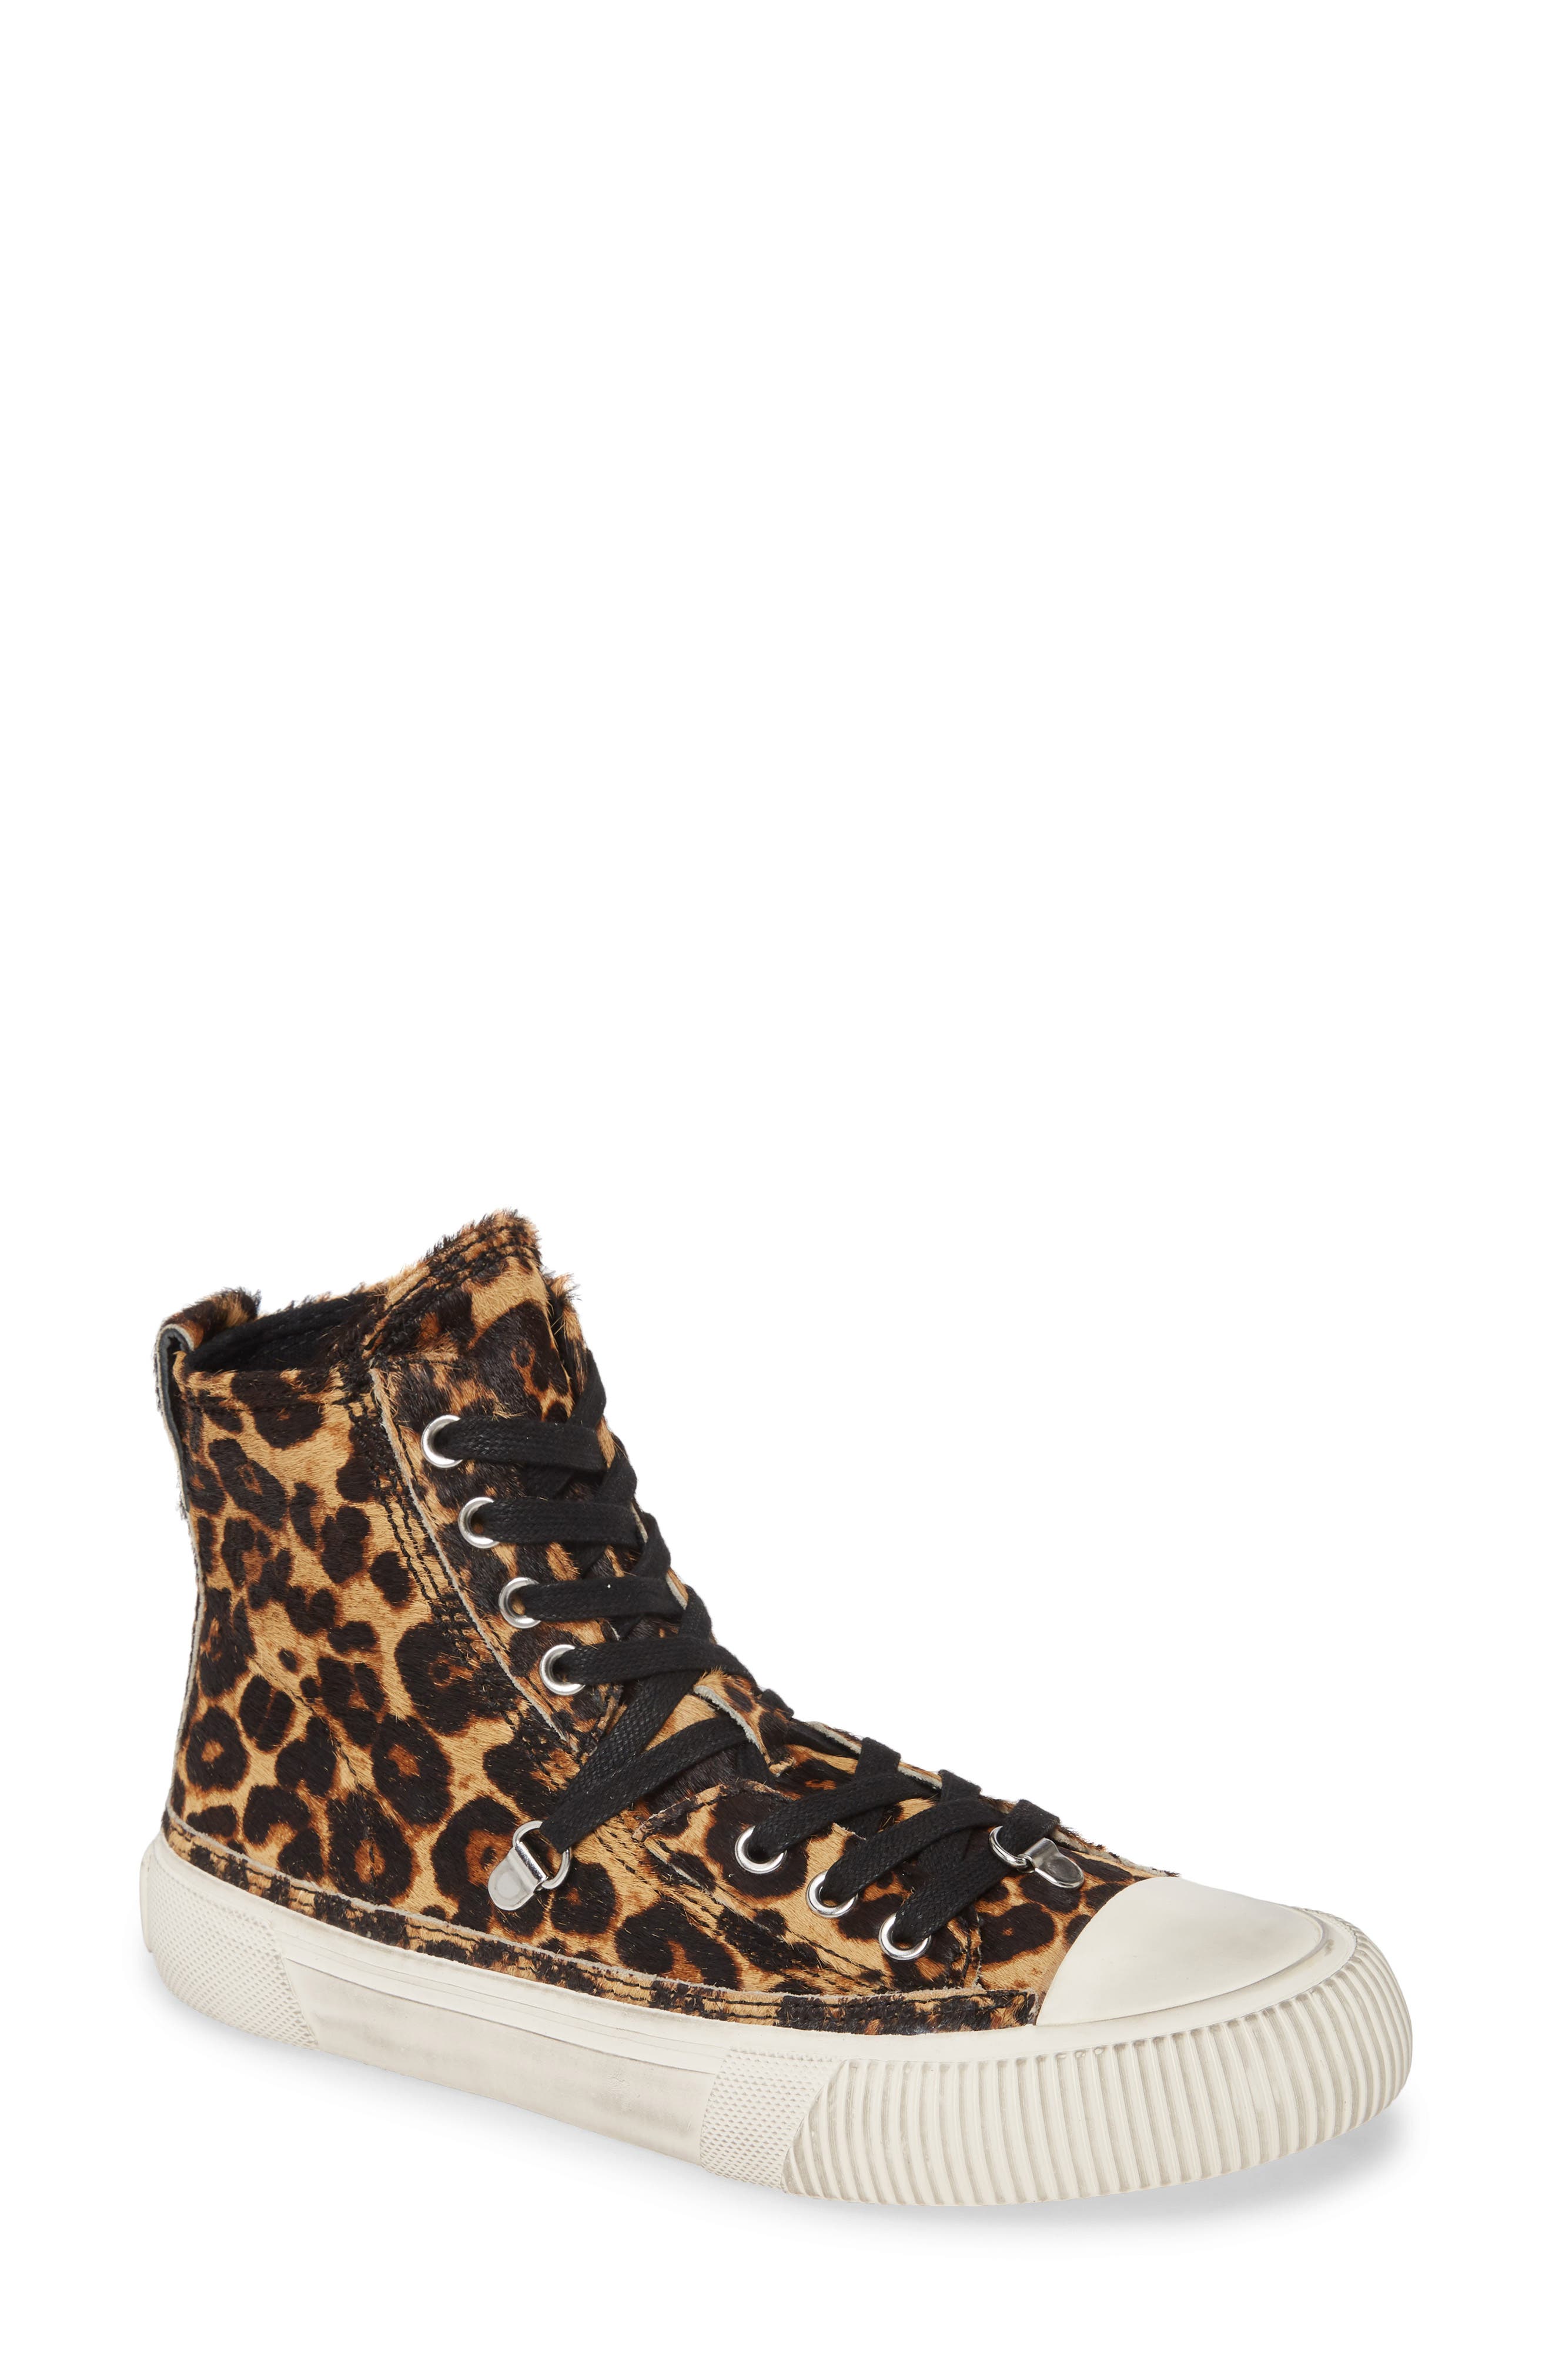 all saints high top sneakers